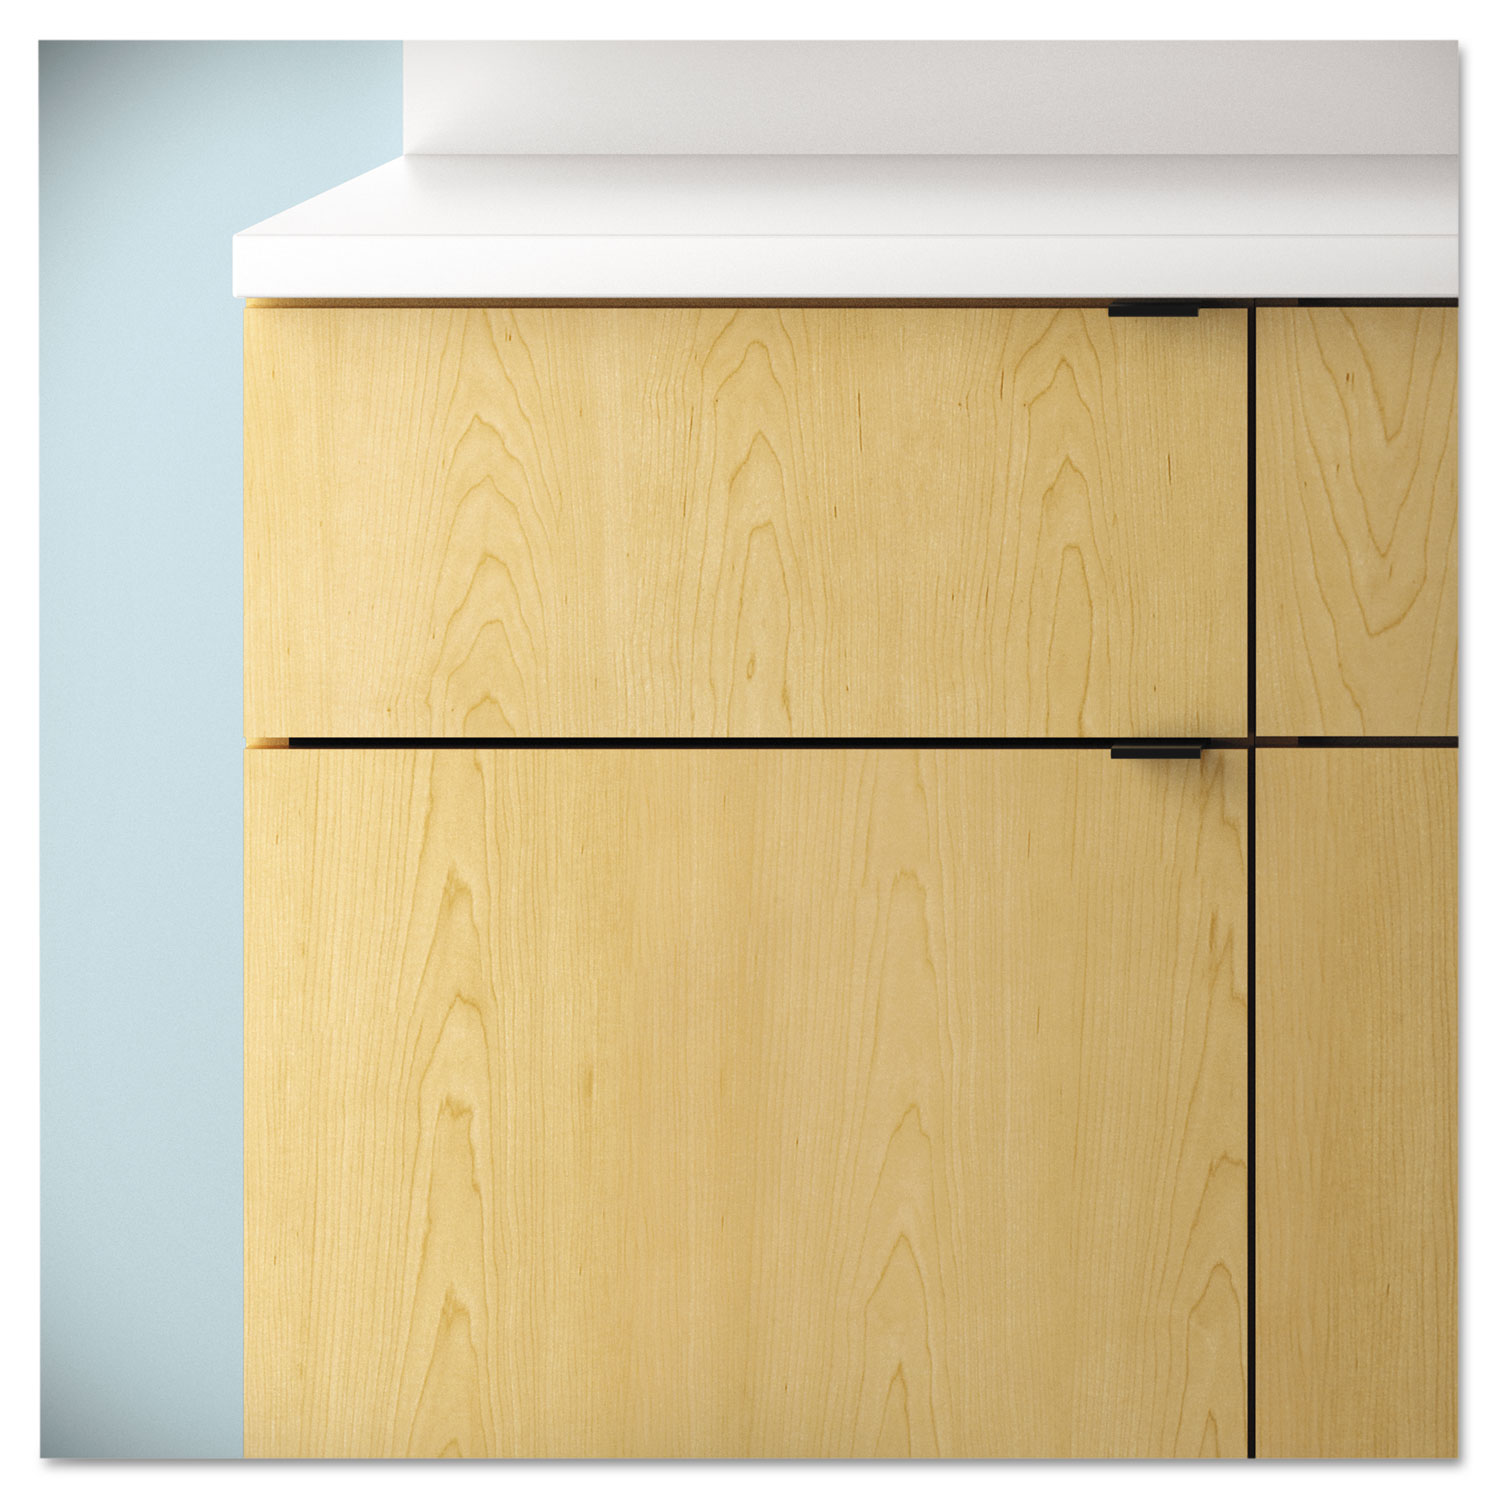 Hospitality Single Base Cabinet, Door/Drawer, 18w x 24d x 36h, Natural Maple